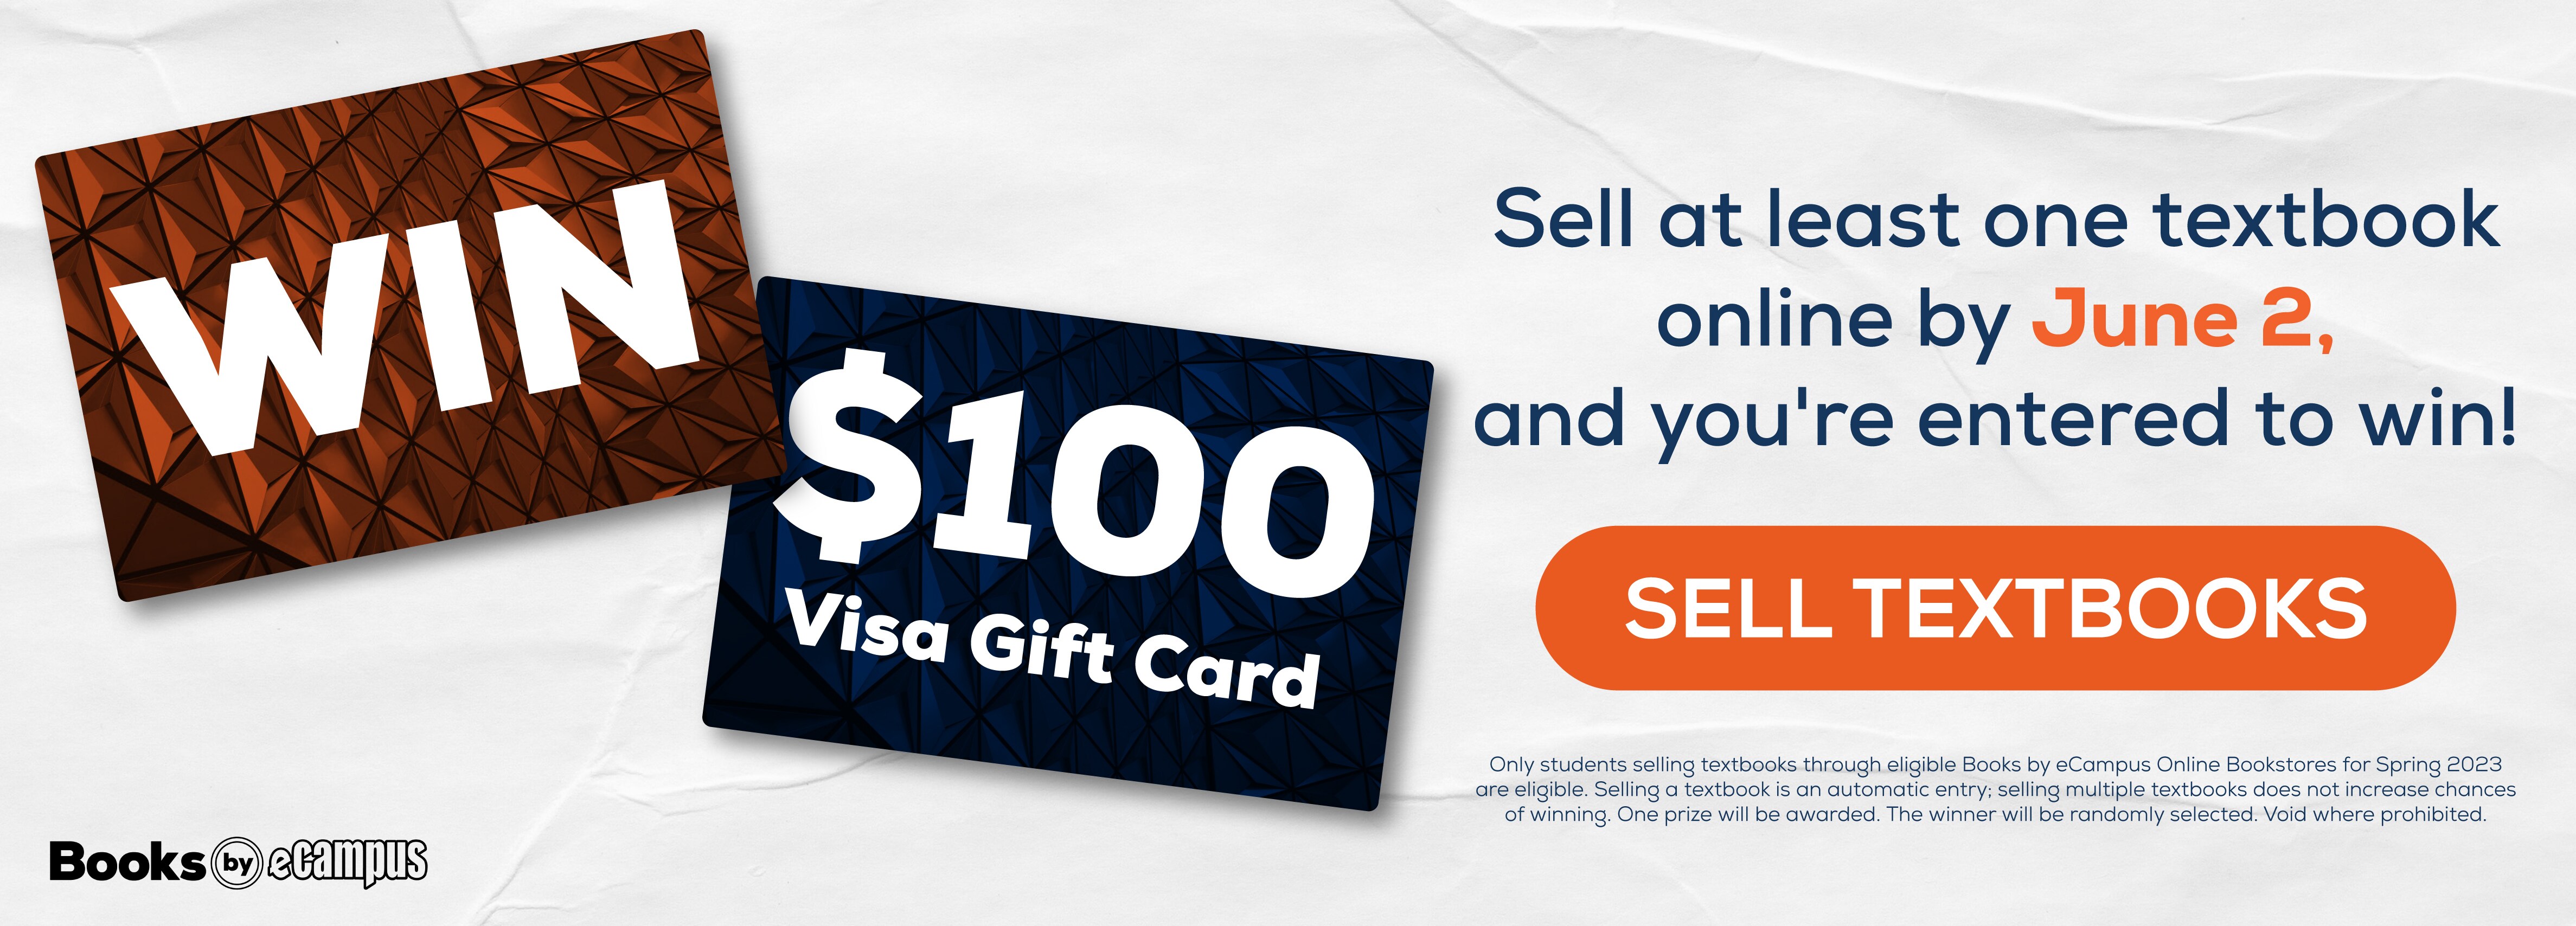 Win $100 Visa Gift Card. Sell at least one textbook online by June 2, and you're entered to win! Sell Textbooks. Only students selling textbooks through eligible Books by eCampus Online Bookstores for Spring 2023 are eligible. Selling a textbook is an automatic entry; selling multiple textbooks does not increase chances of winning. One prize will be awarded. The winner will be randomly selected. Void where prohibited.